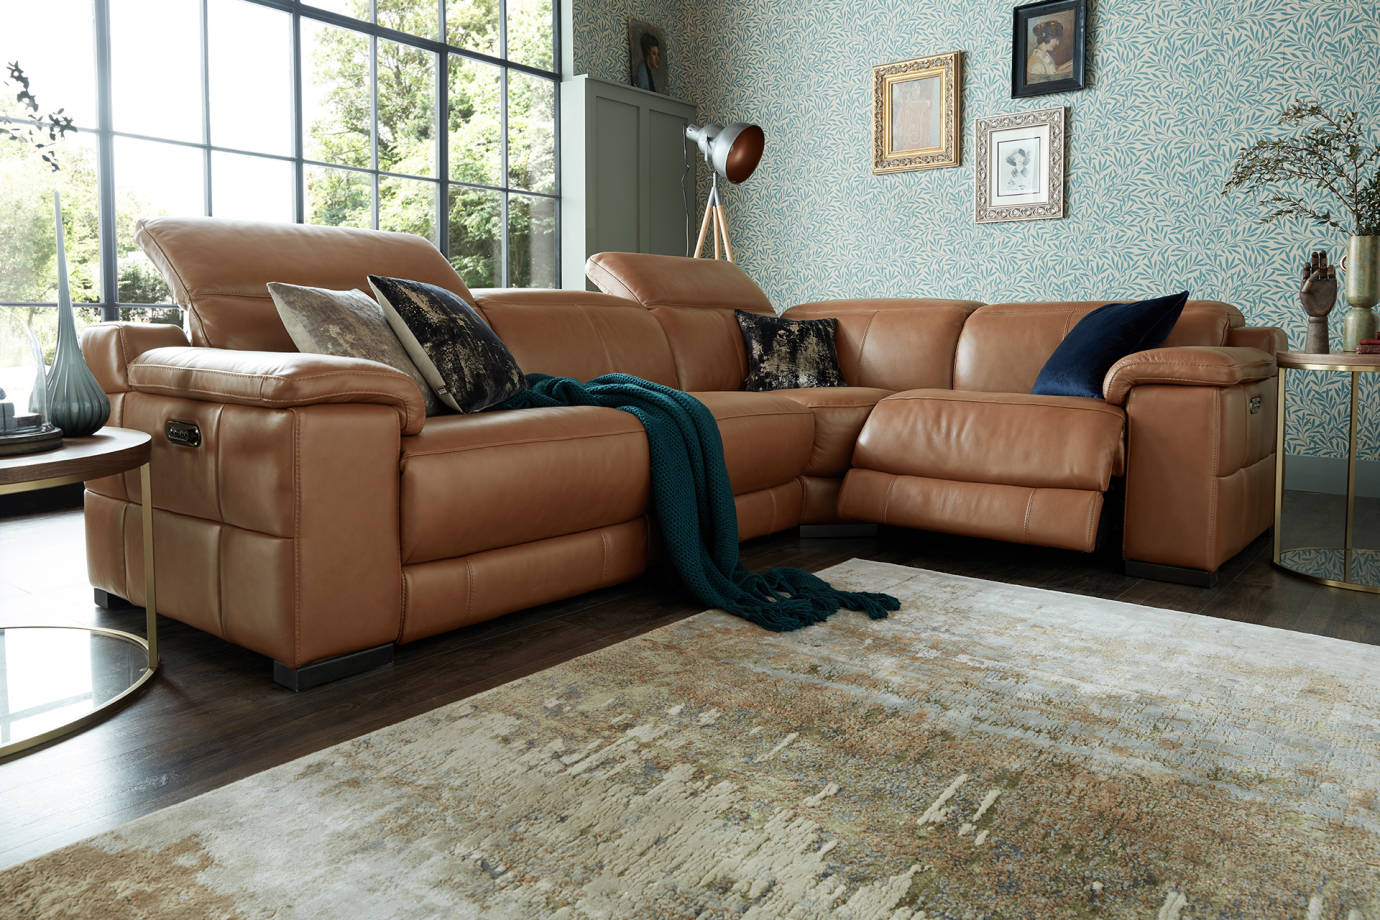 Corner Sofas Leather And Fabric, Modern Leather Corner Recliner Sofa